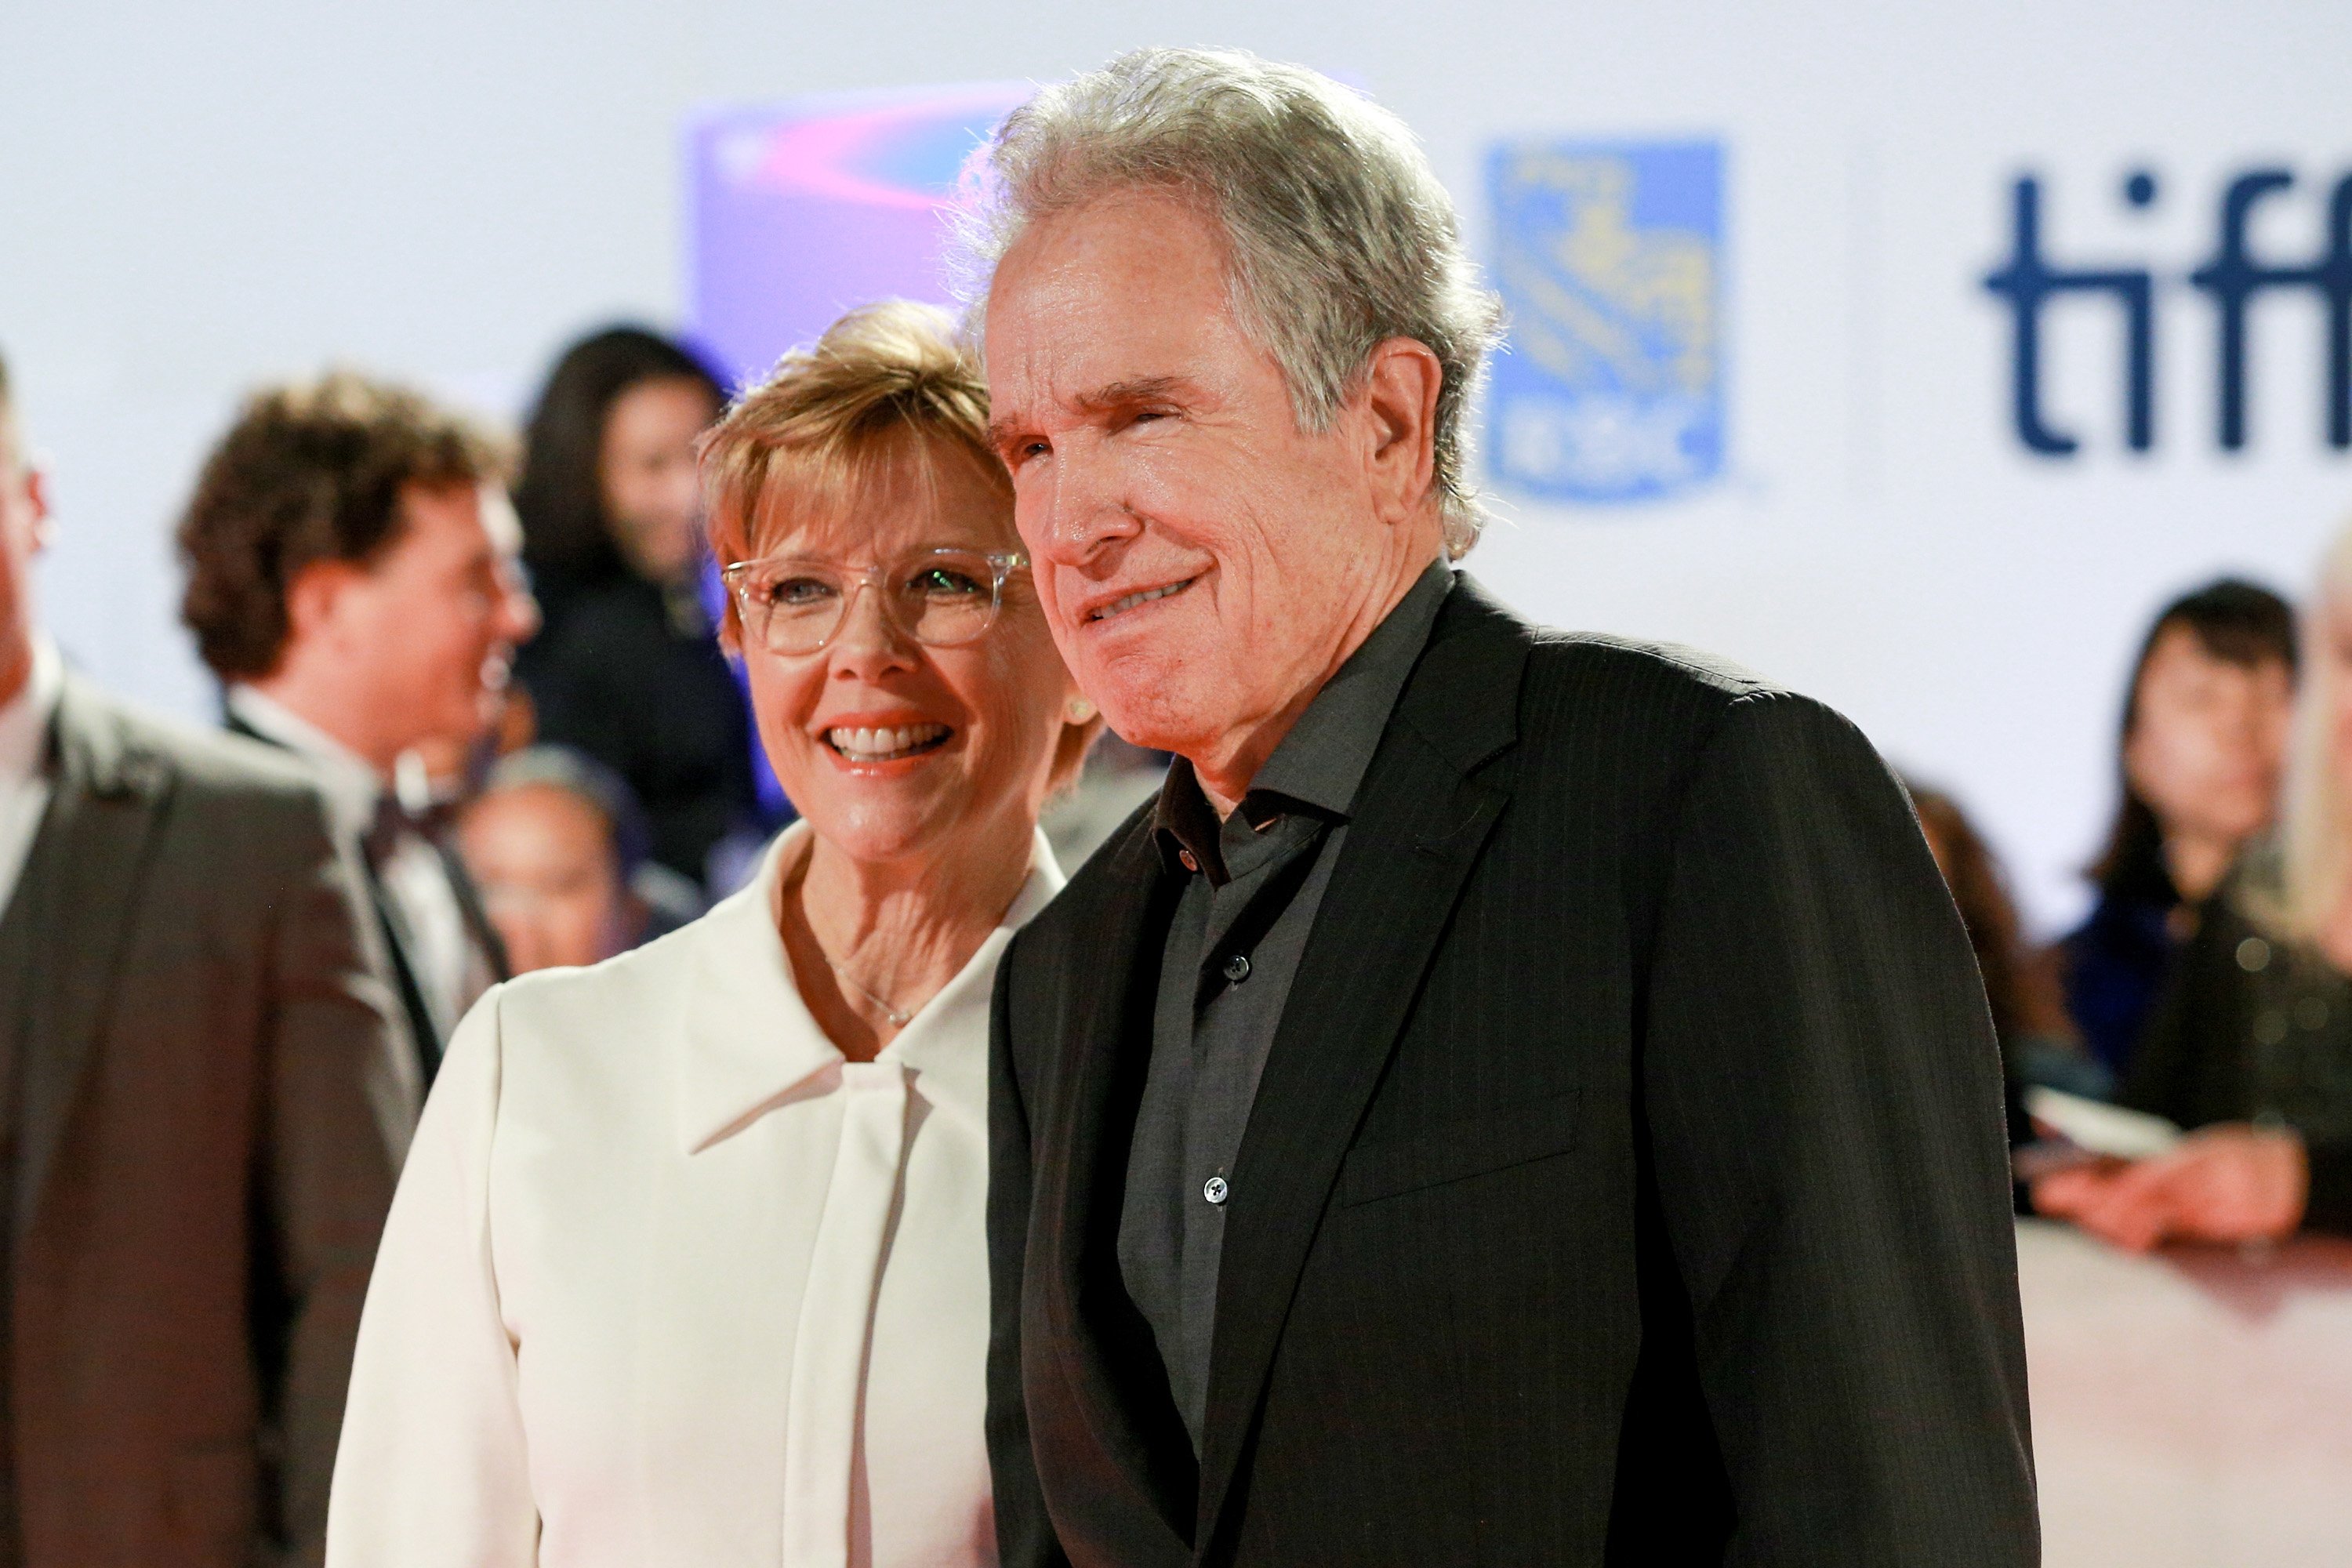 Annette Bening and Warren Beatty attend the 'Film Stars Don't Die in Liverpool' premiere on September 12, 2017 in Toronto, Canada. | Source: Getty Images